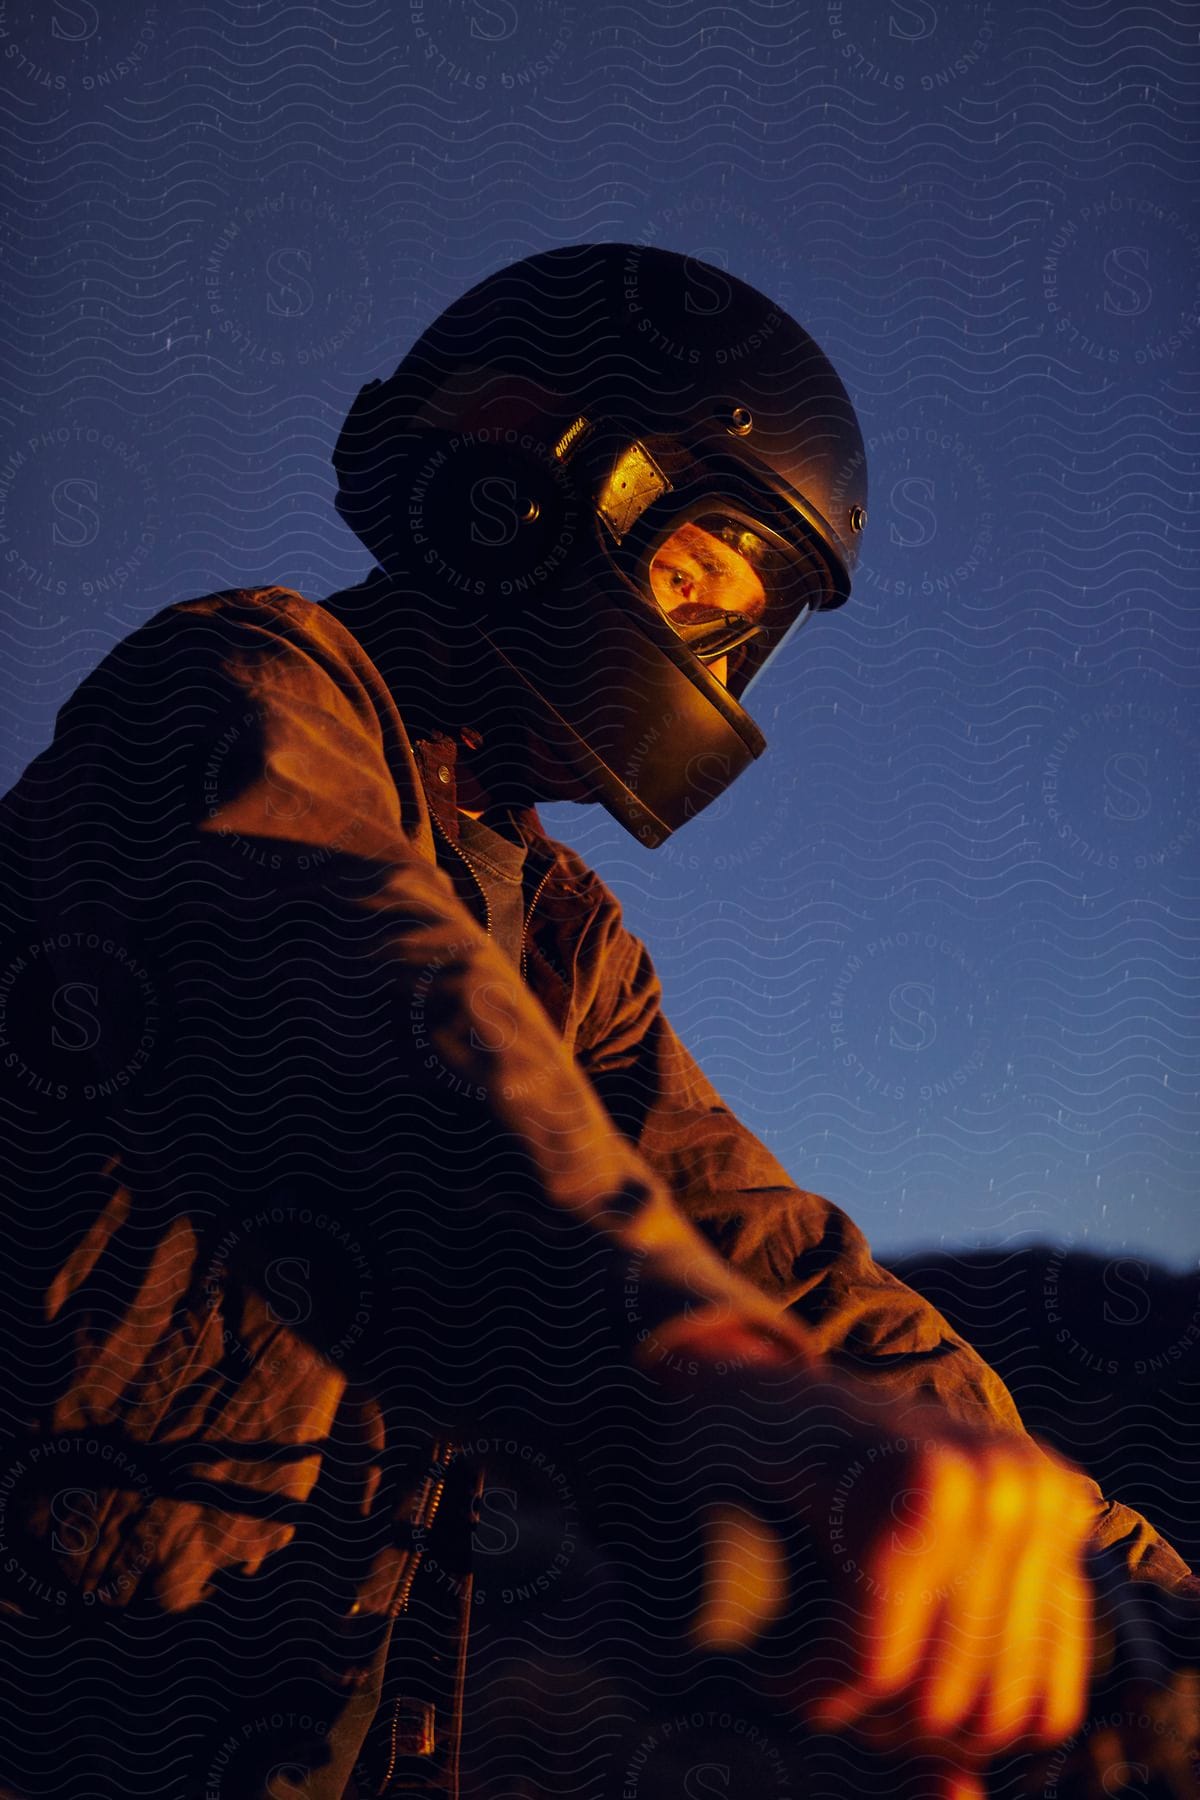 A motorcyclist wearing a full-face helmet is captured in a contemplative moment, illuminated by warm light against the evening sky.